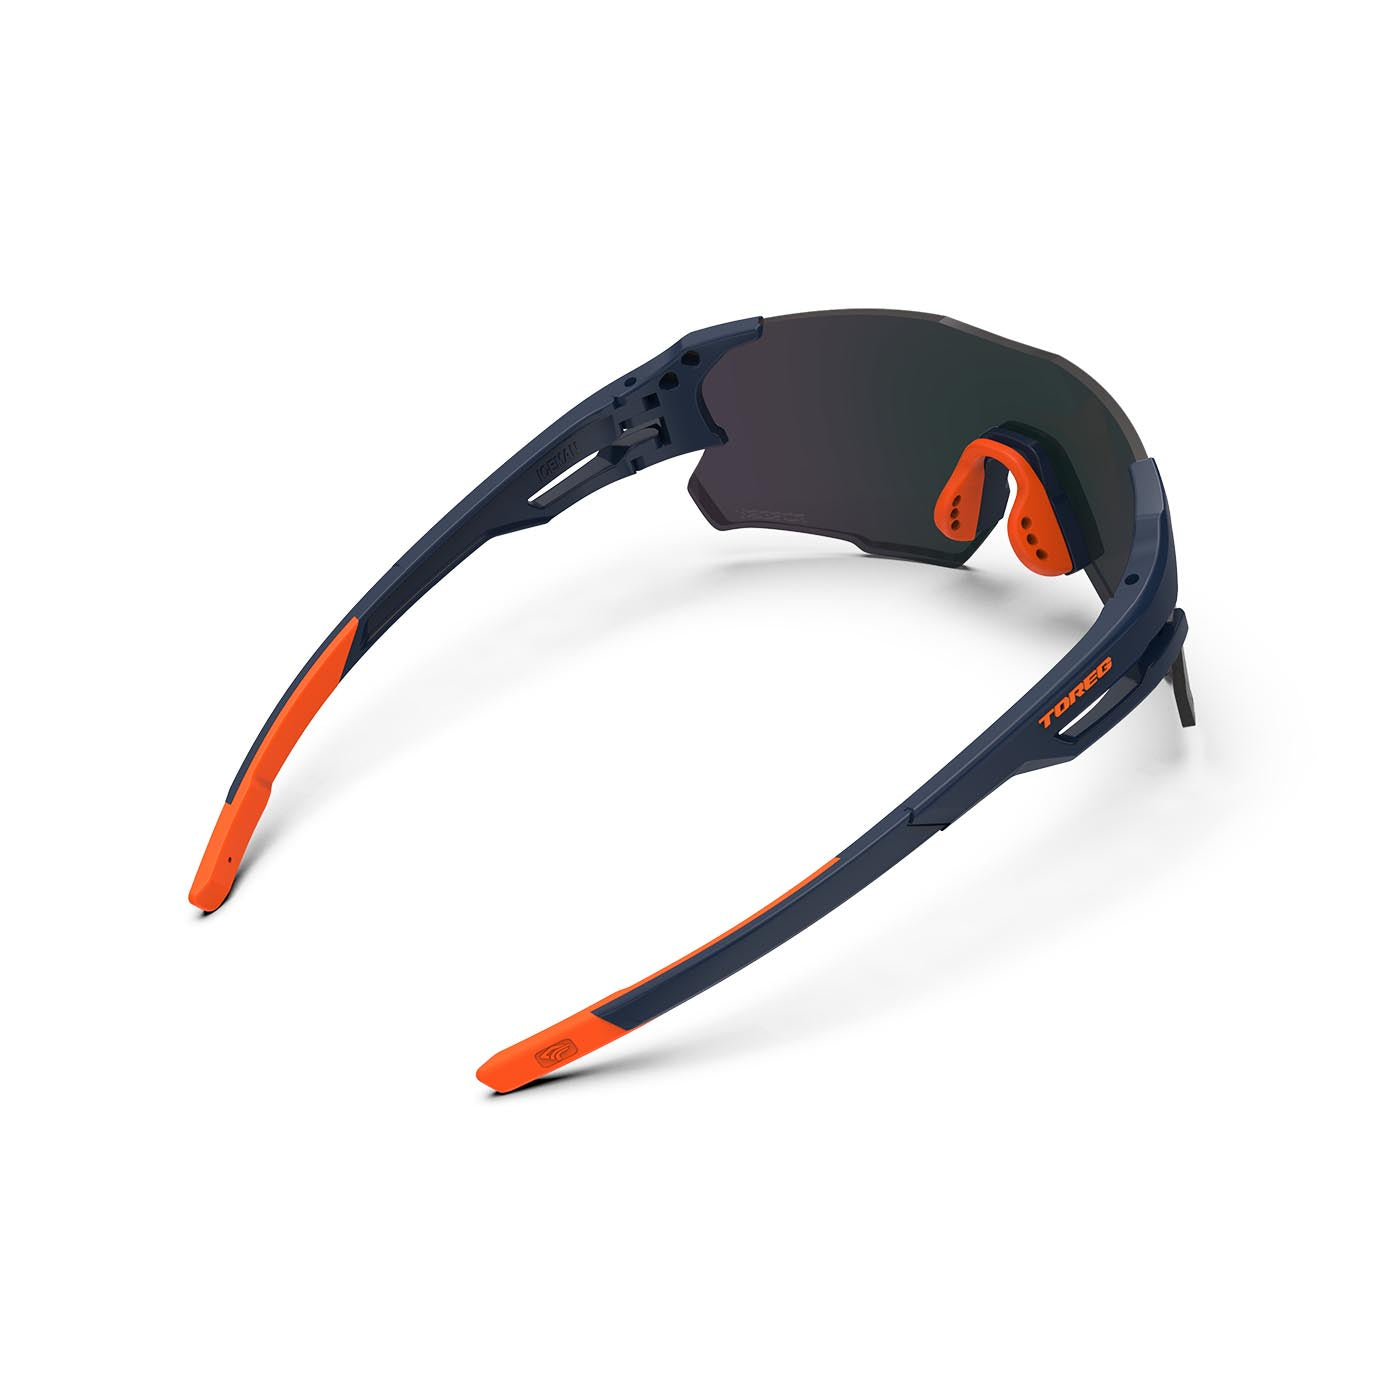 Tempation Ultra Lightweight Wraparound With Cycling, for - Women Fishing, Active Blue - and Matte Perfect Golf, Lifetime Hiking, Running Frame for Orange Sunlight Sunglasses Lens Warranty and Sport & Men